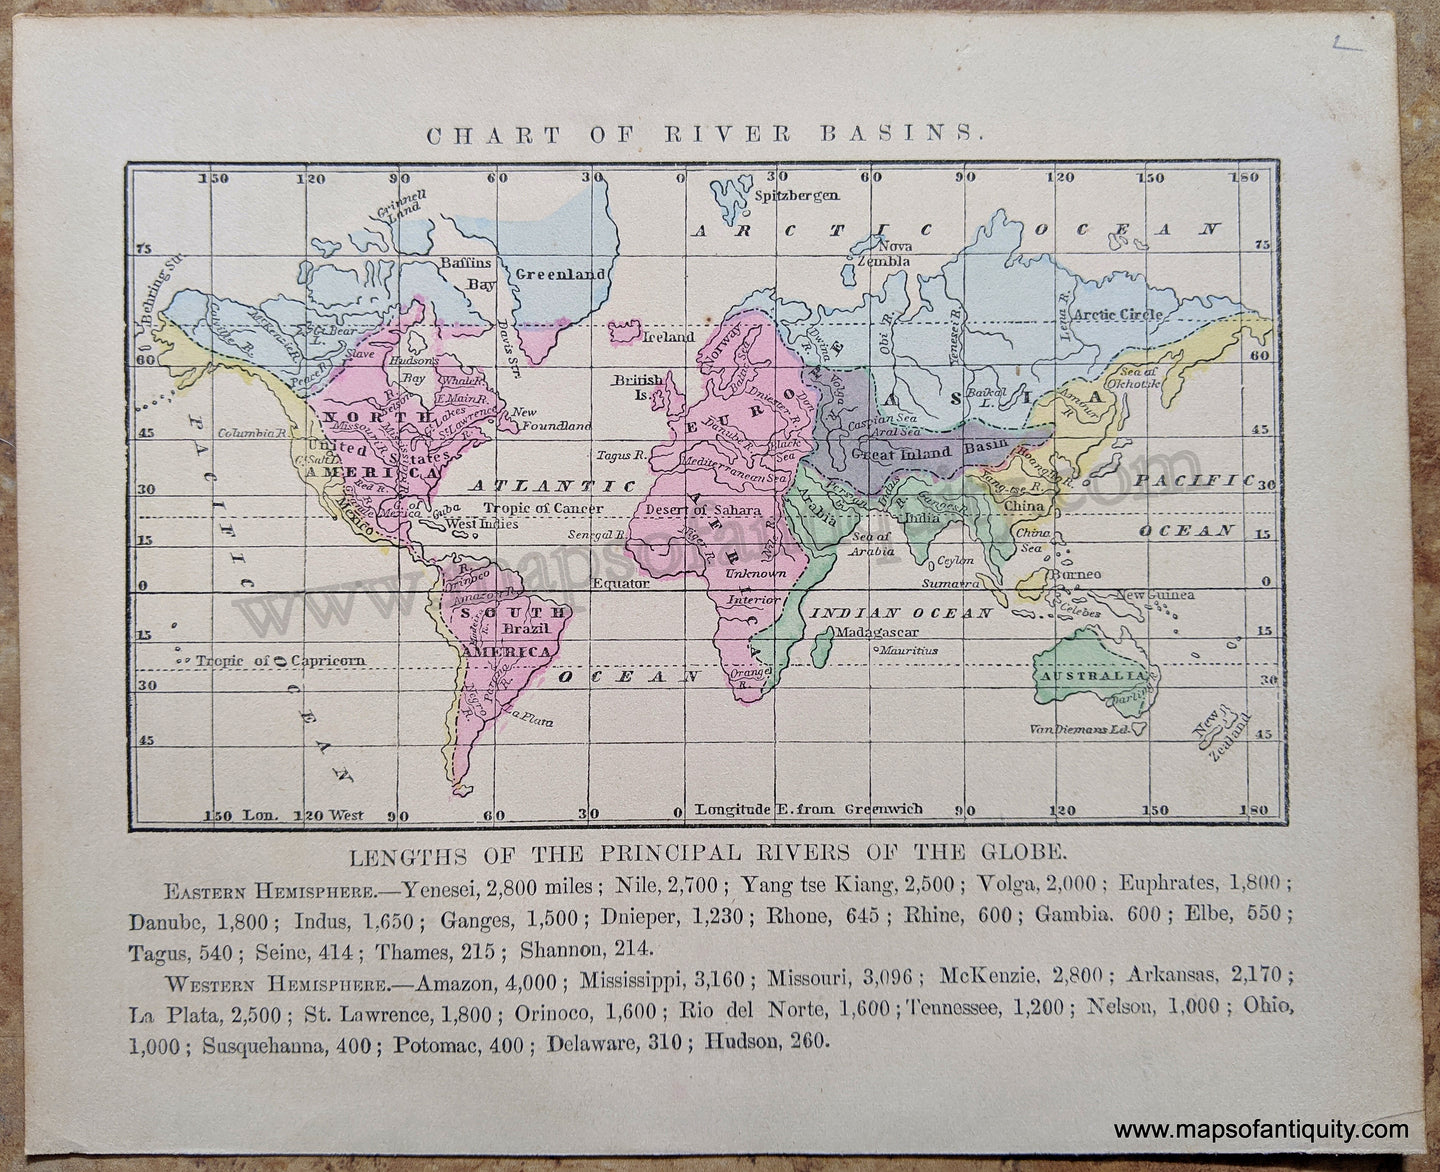 Antique-Hand-Colored-Map-Chart-of-the-River-Basins-World--1857-Morse-and-Gaston-Maps-Of-Antiquity-1800s-19th-century